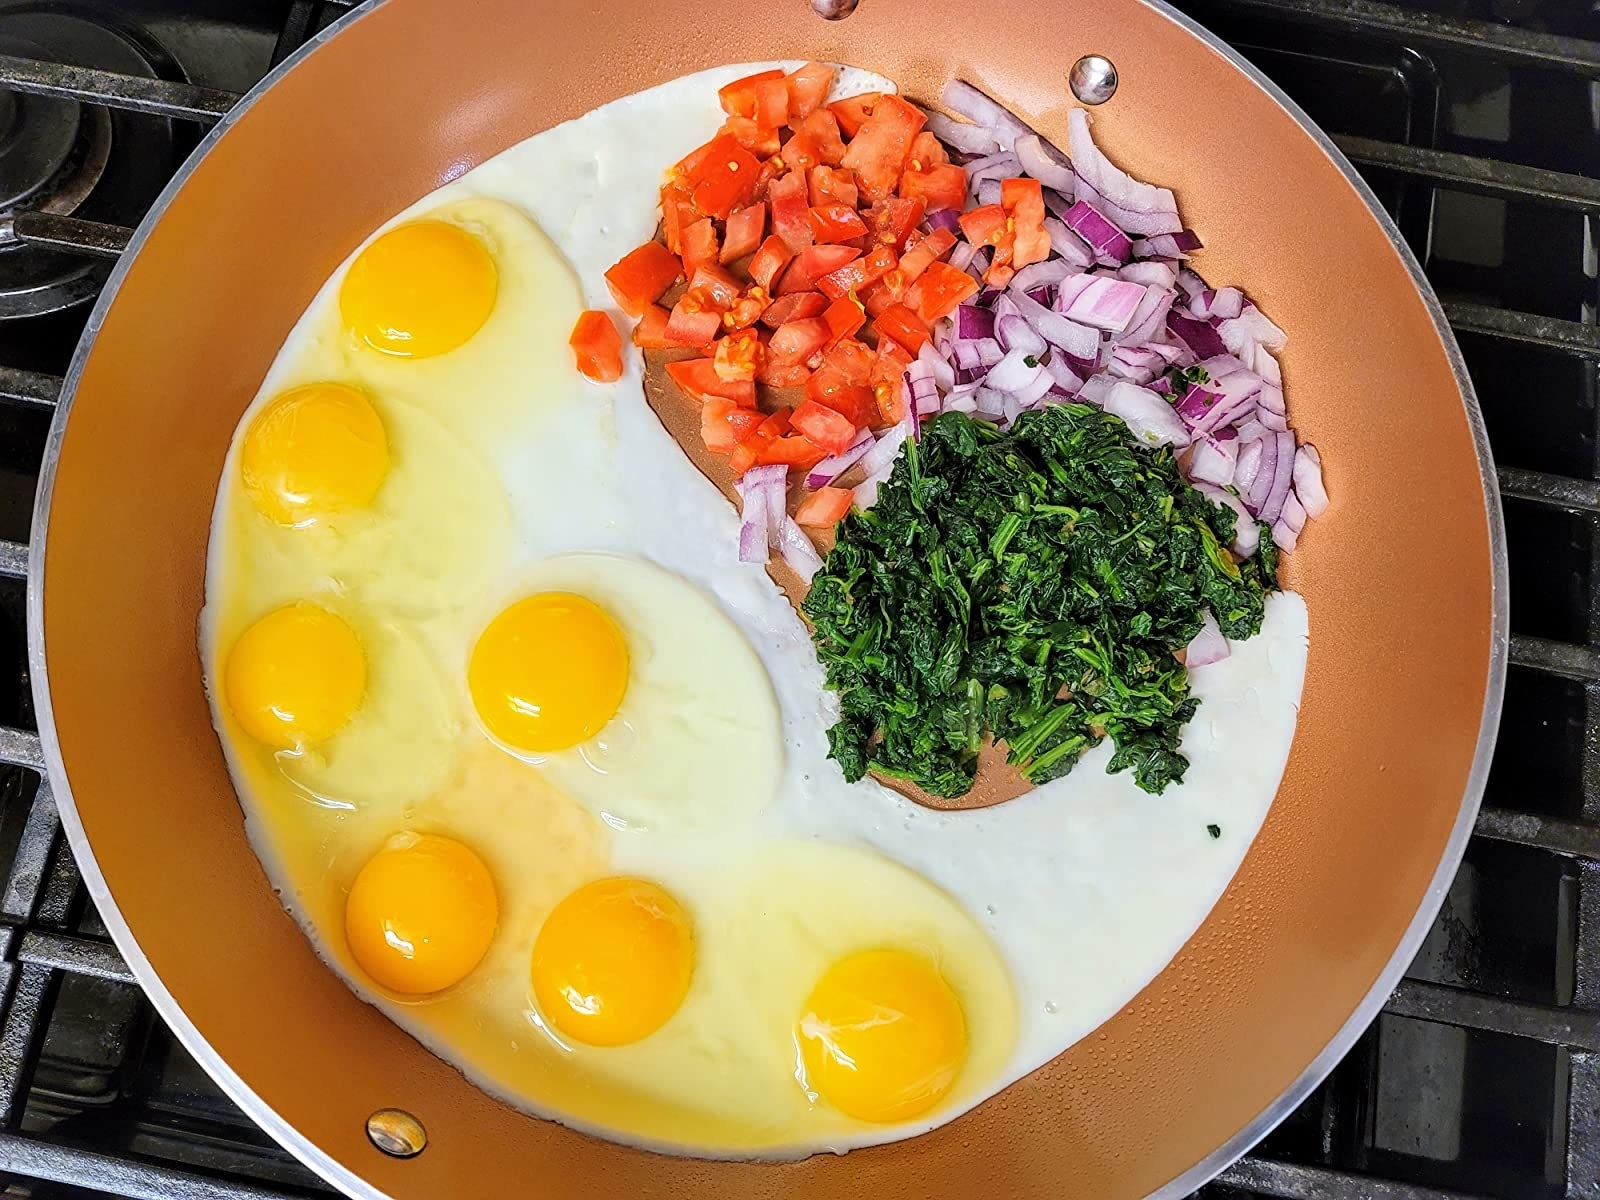 Reviewer image of eggs and other ingredients in the pan